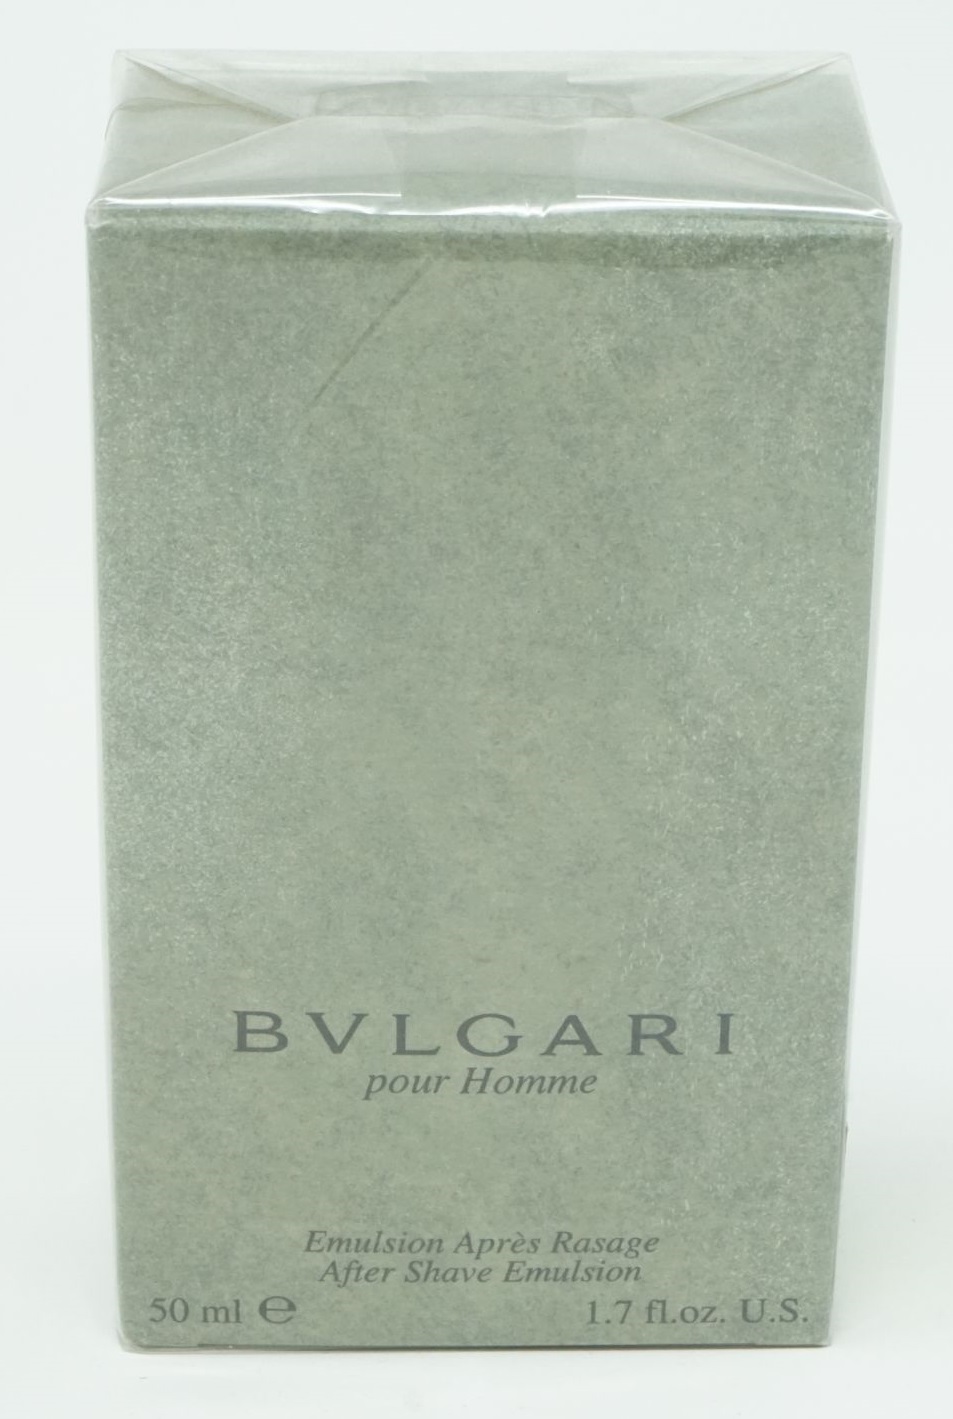 BVLGARI POUR HOMME 50ML EMULSION AFTER SHAVE RARE